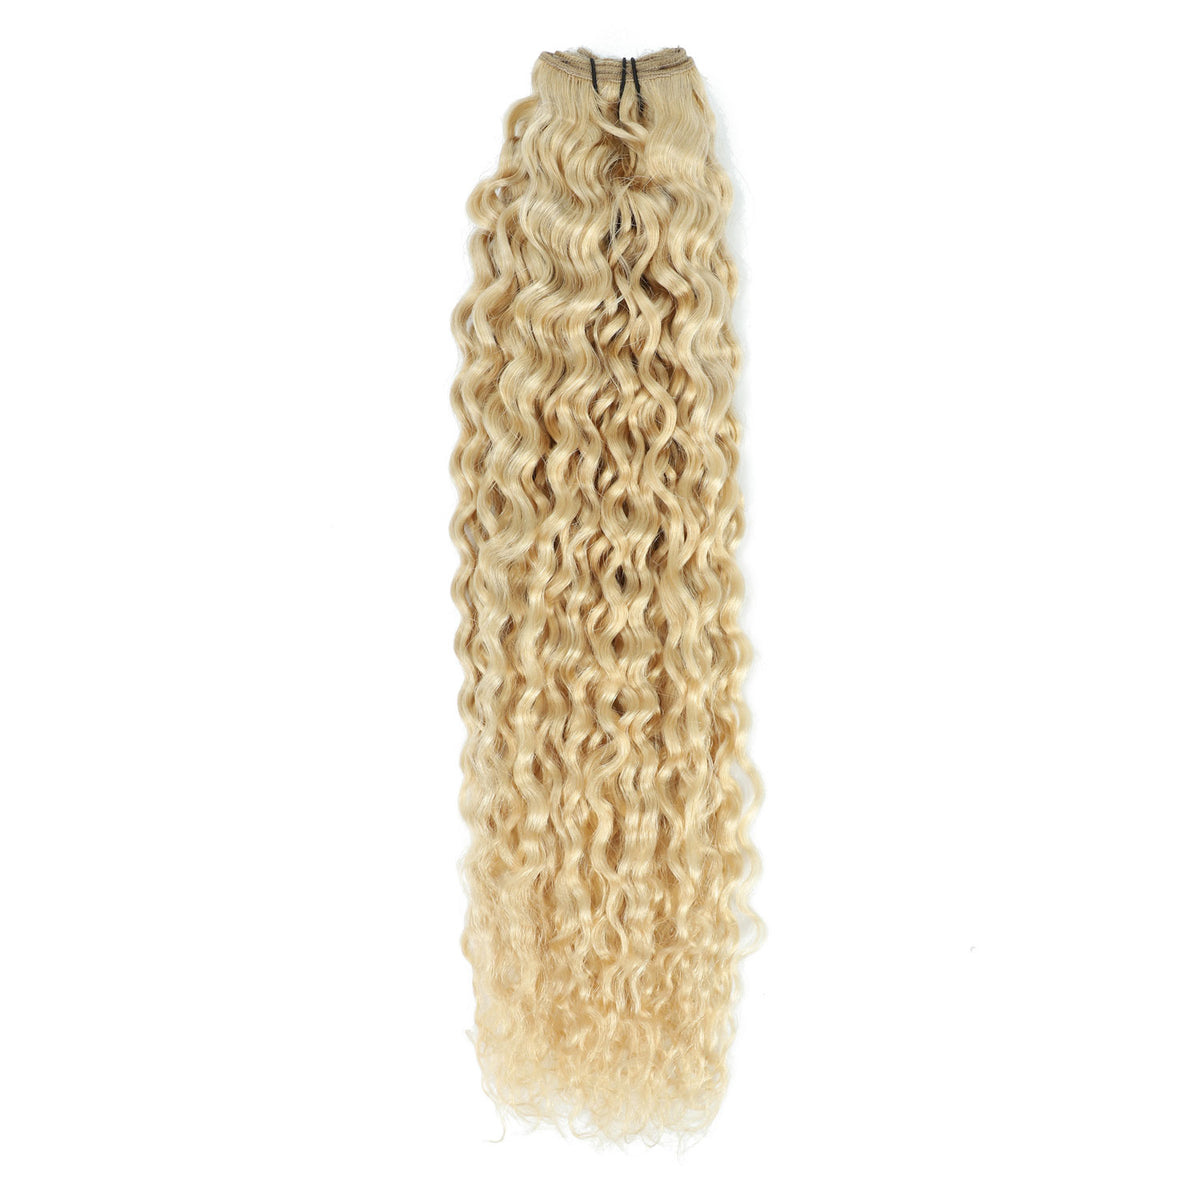 Weft Curly Hair Extensions 21" #1001 Pearl Blonde